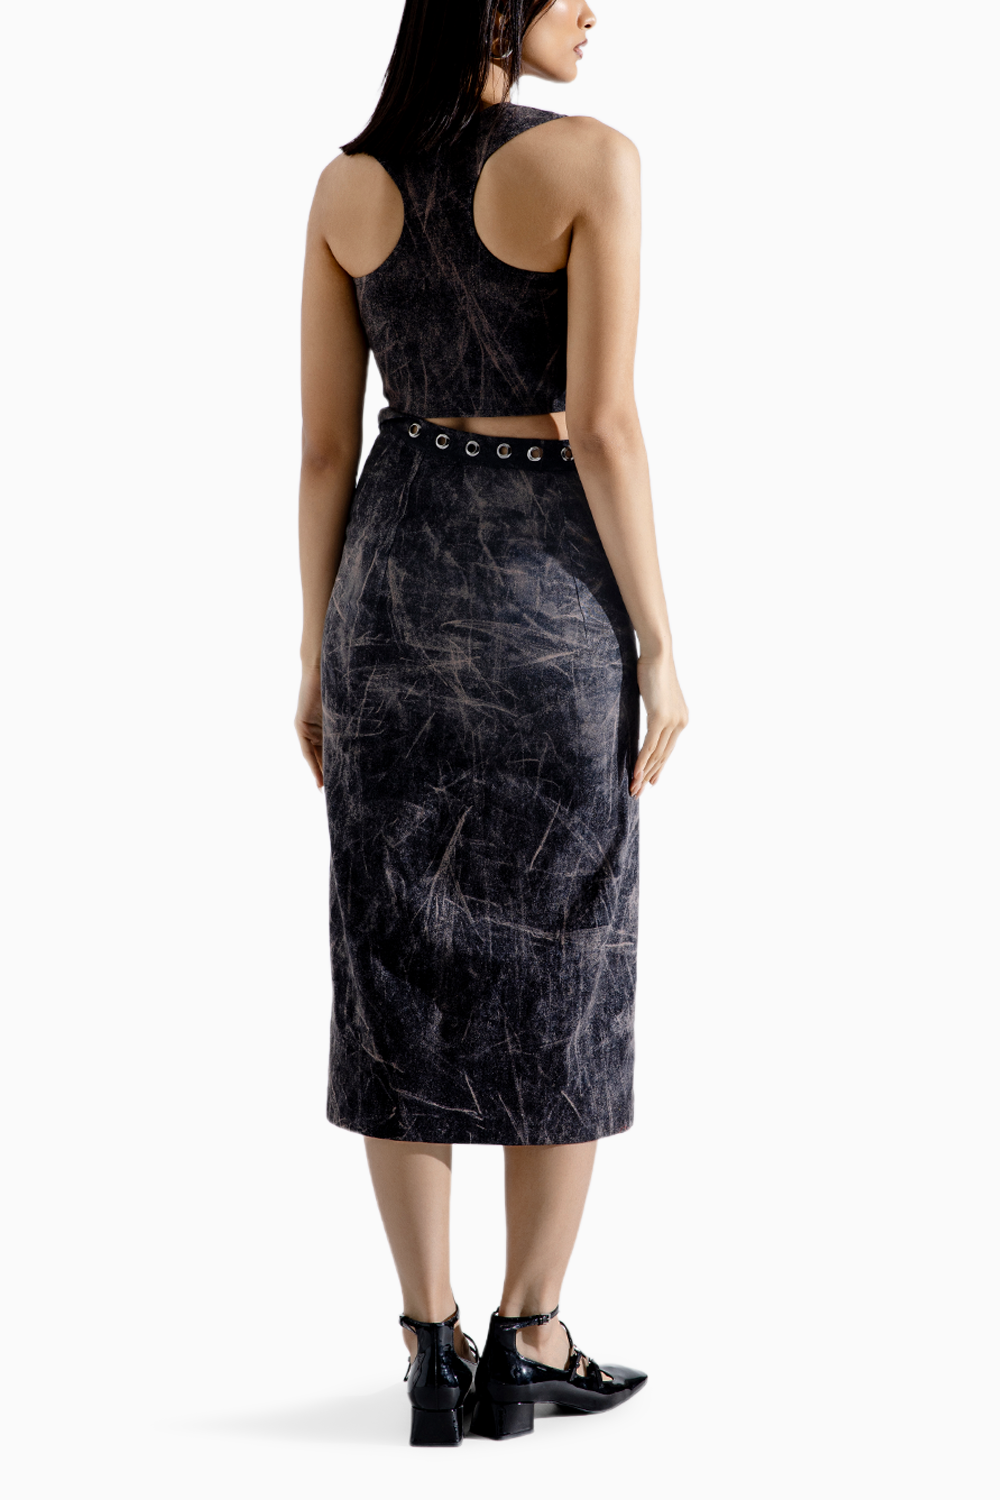 Steel Grunge T-Back Top and Flap Skirt